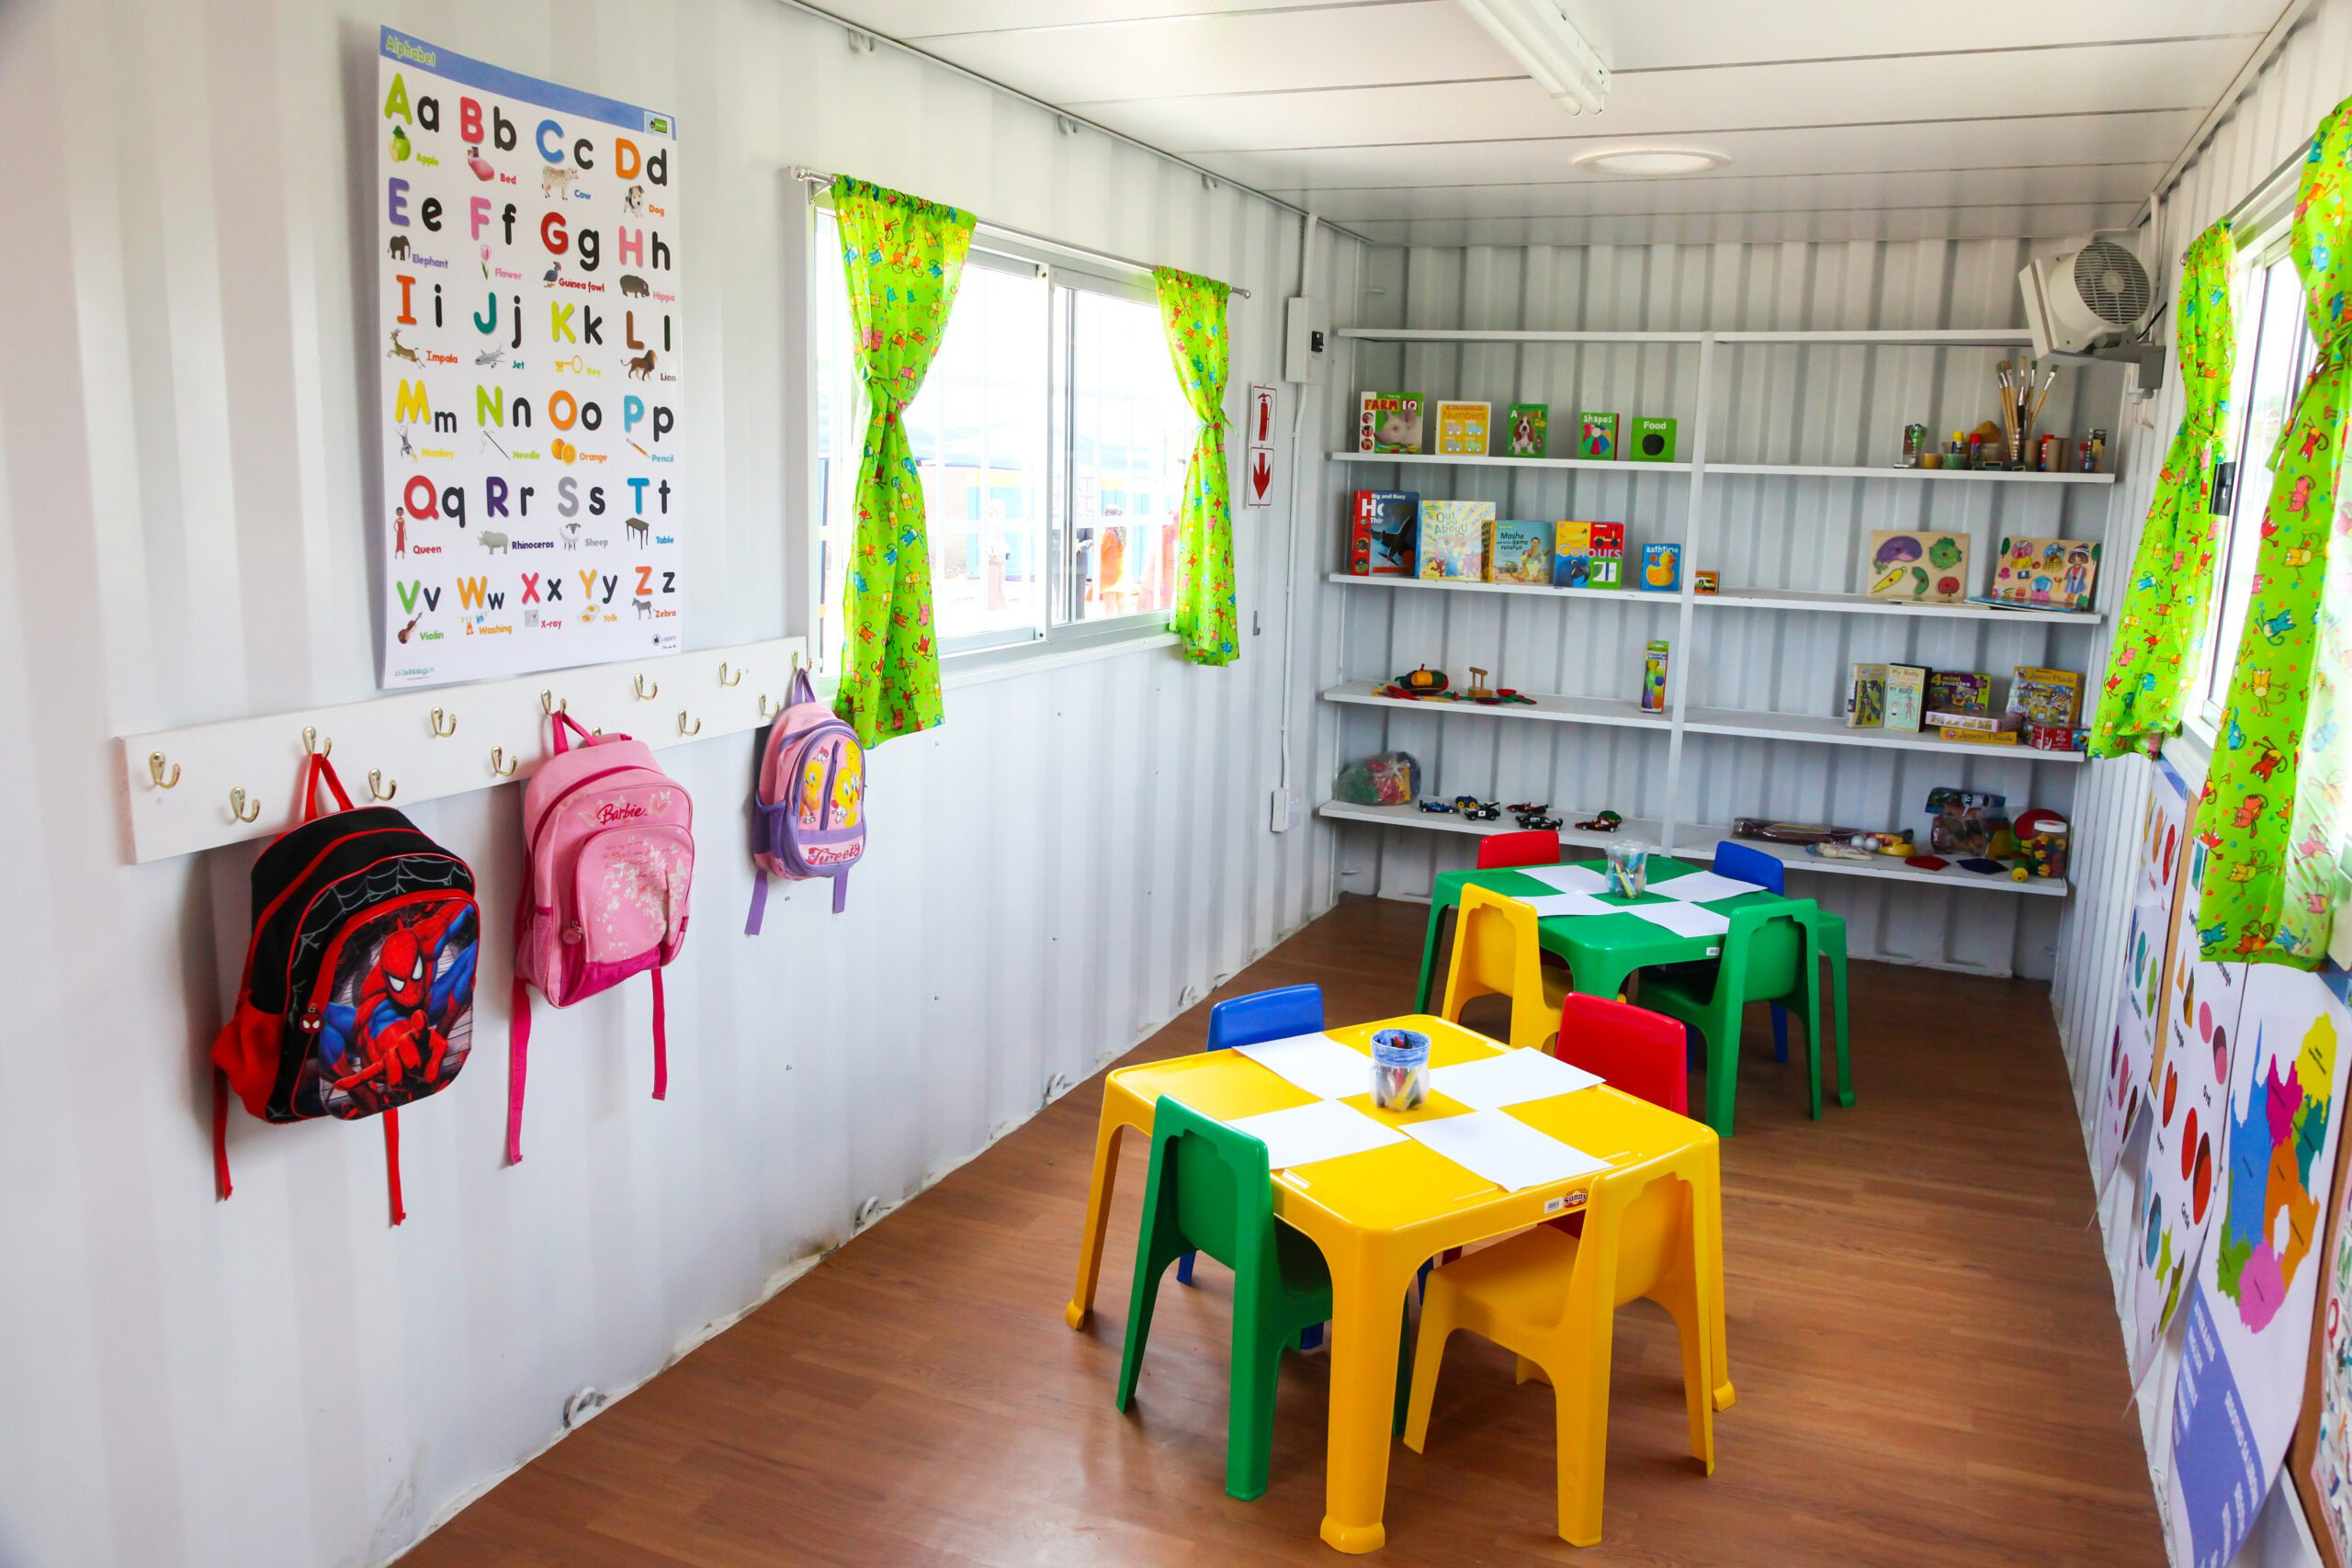 Colorful interior of a child's classroom inside a converted shipping container, featuring small tables, chairs, educational toys, and alphabet decorations on the walls.